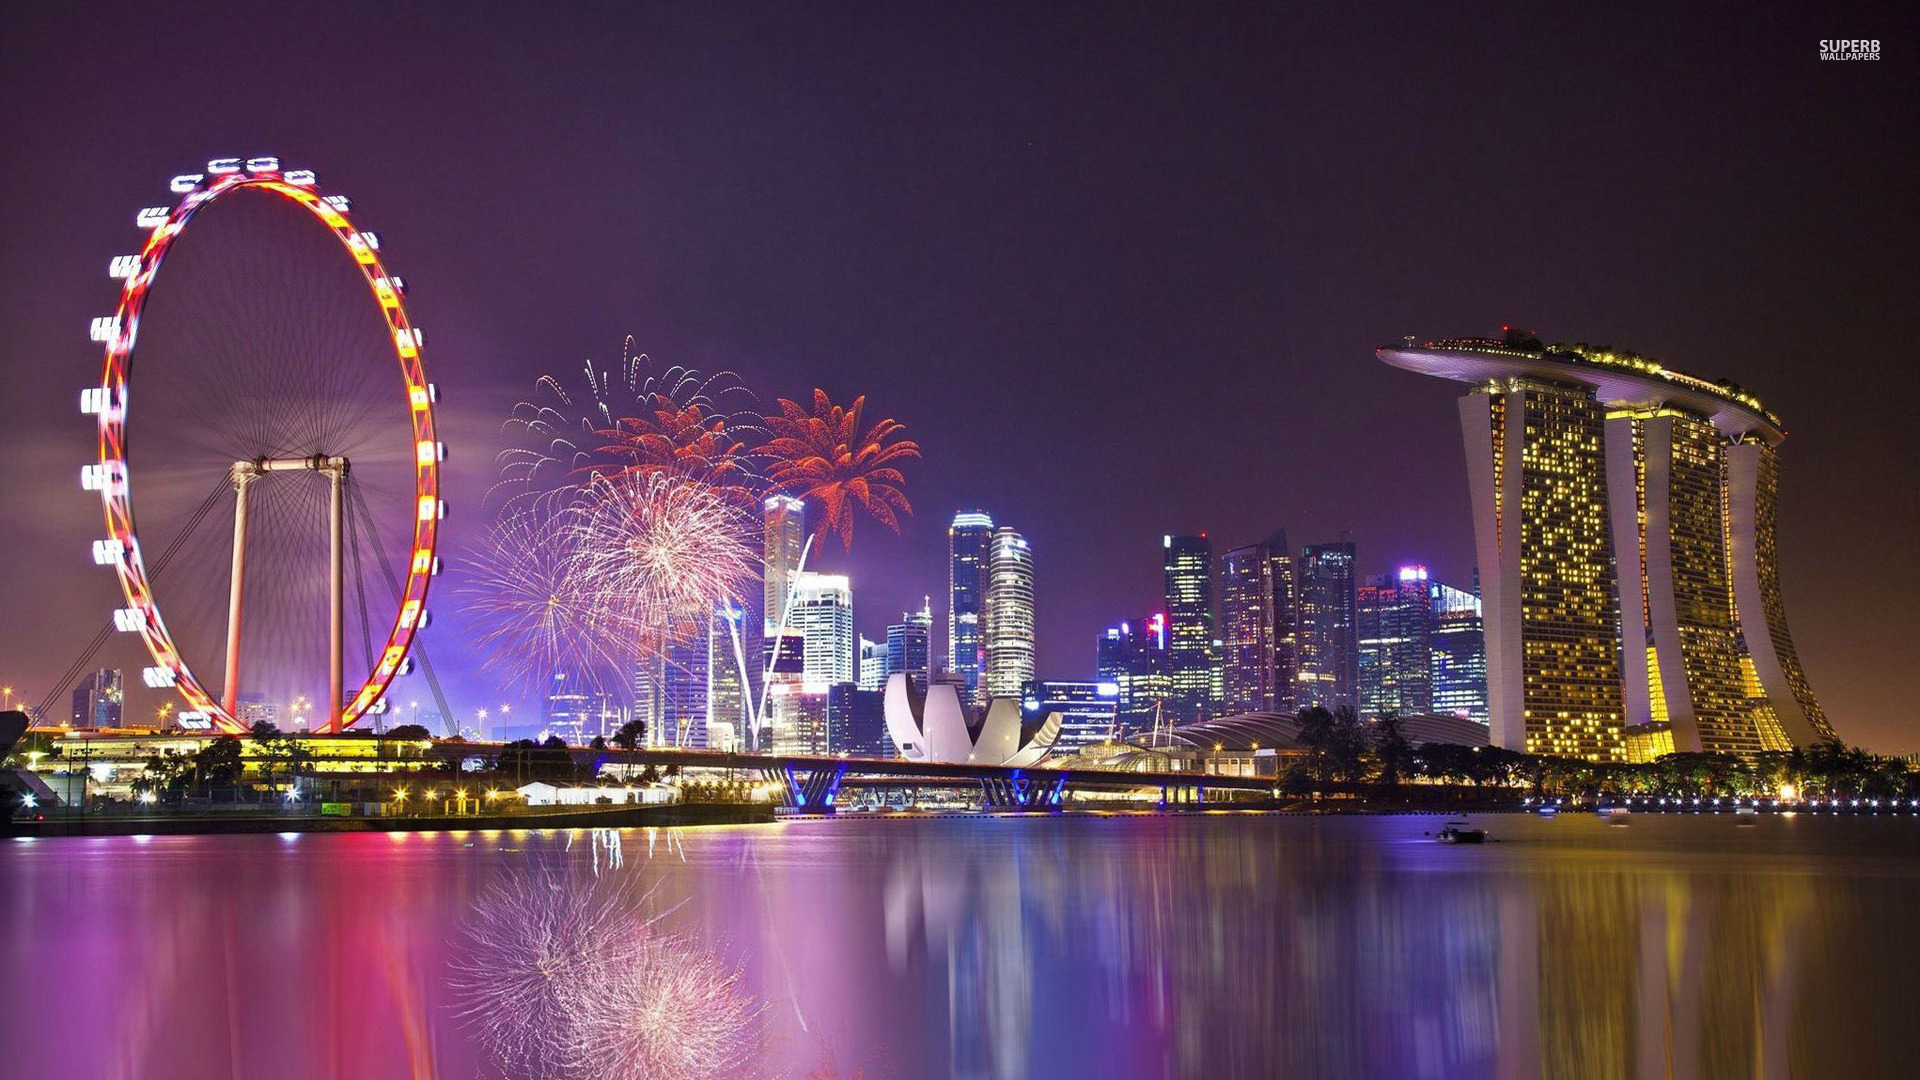 Singapore Flyer High Definition Wallpaper | Travel HD Wallpapers